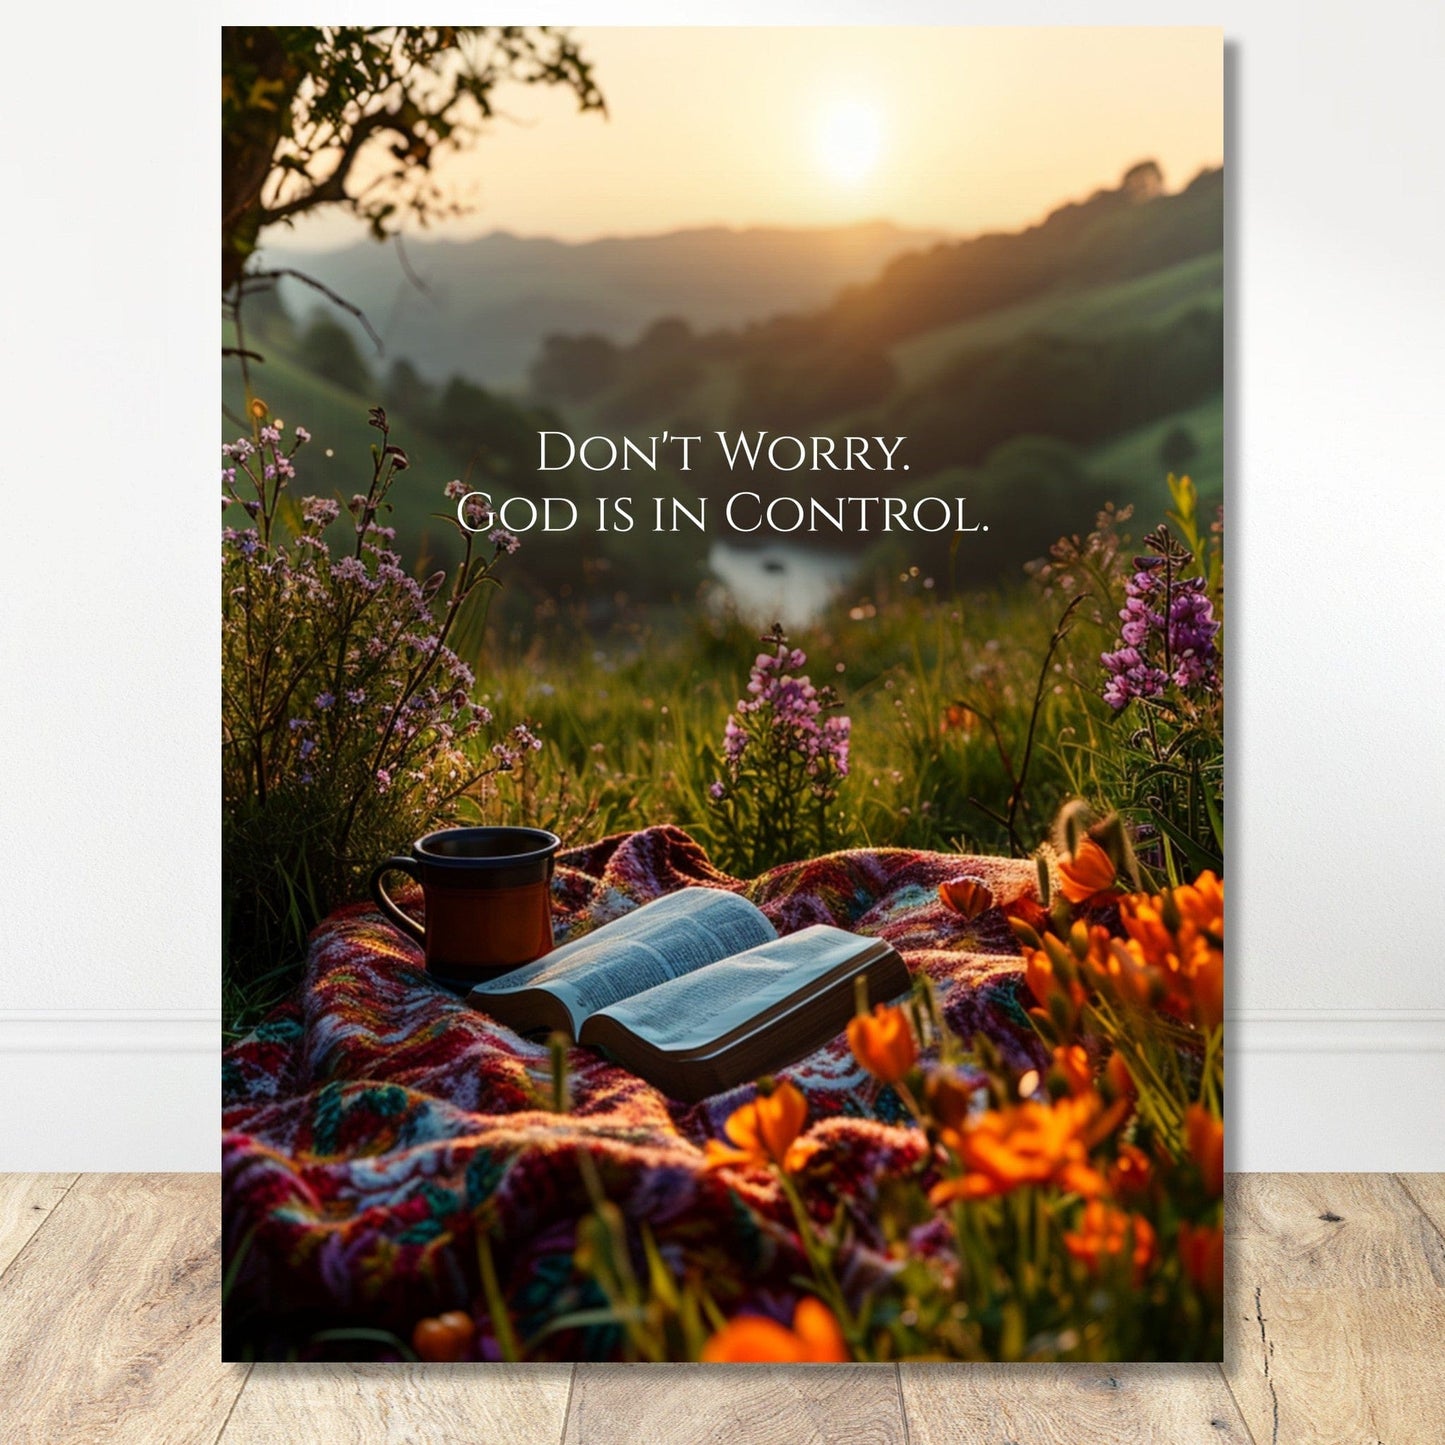 Coffee With My Father Print Material 45x60 cm / 18x24″ / Premium Matte Paper Poster / Unframed Premium Matte Paper Wooden Framed Poster